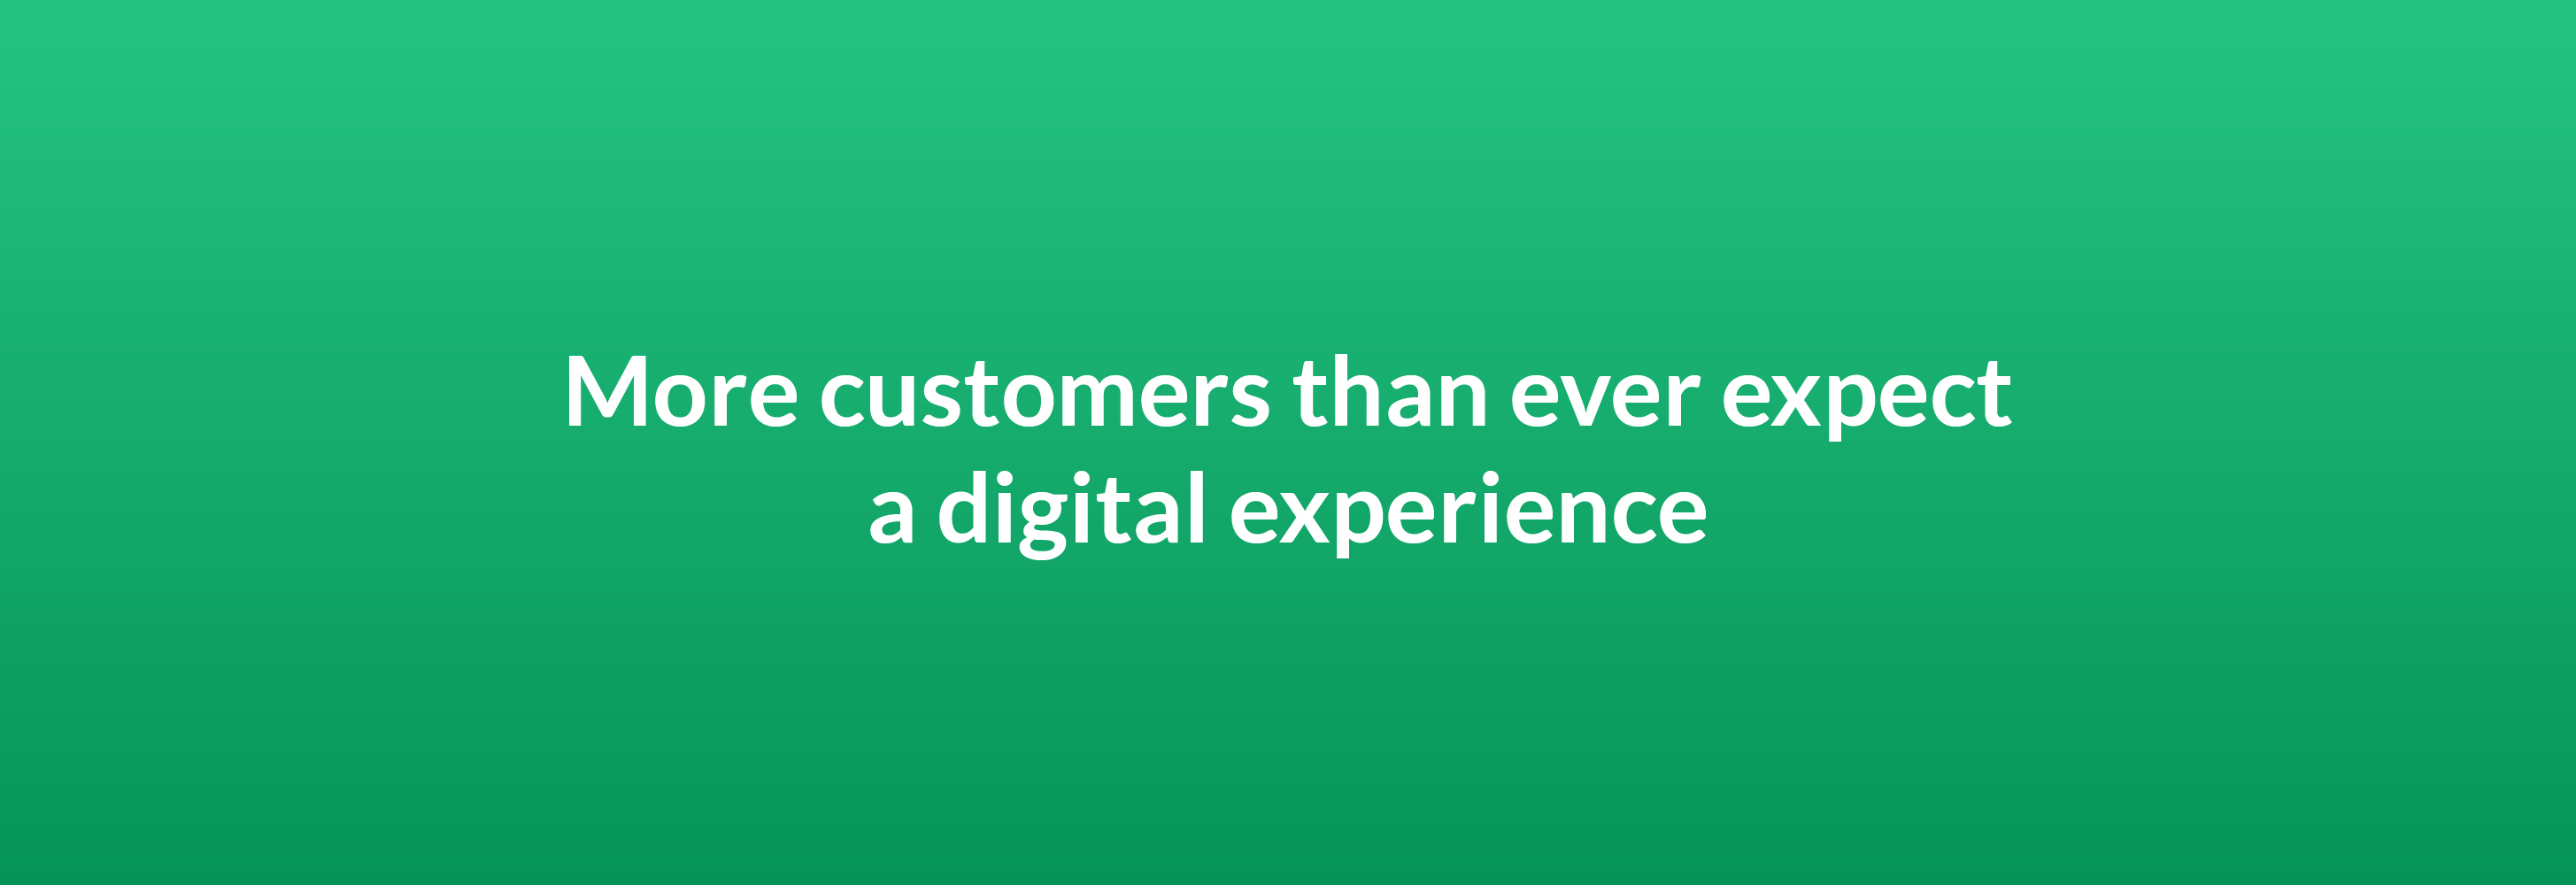 More customers than ever expect a digital experience